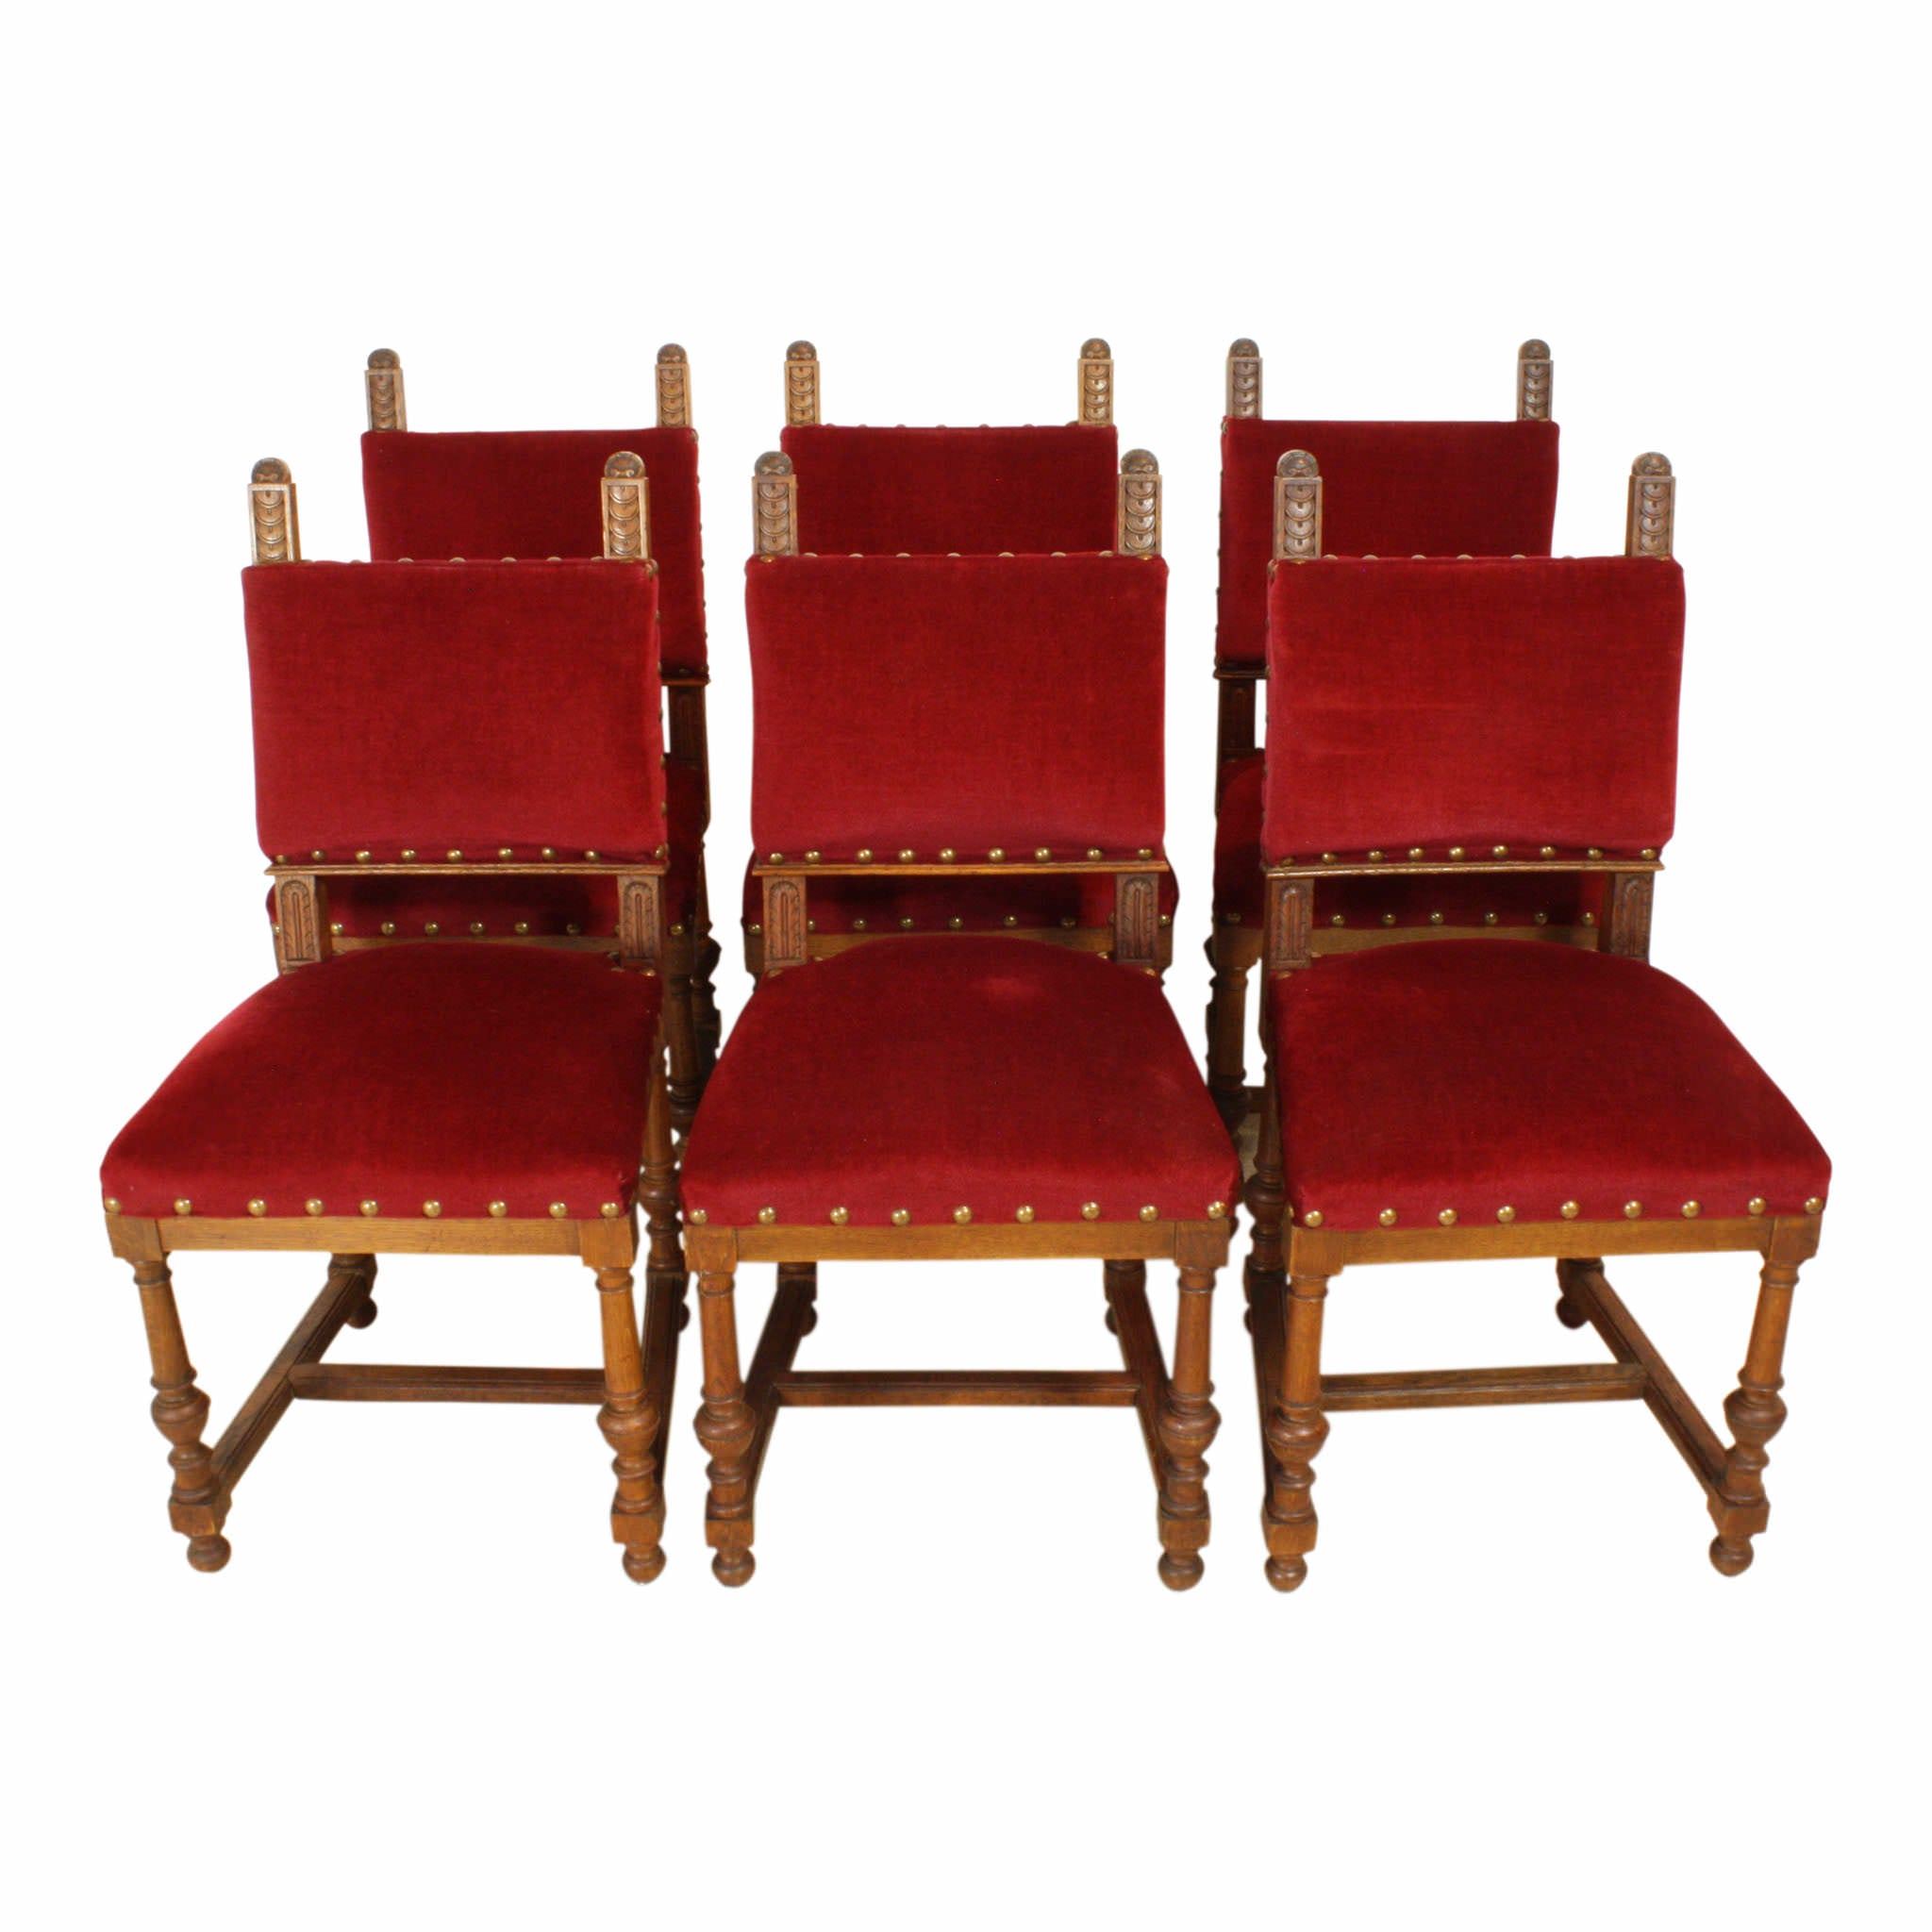 Carved Oak Chairs - Set of Six